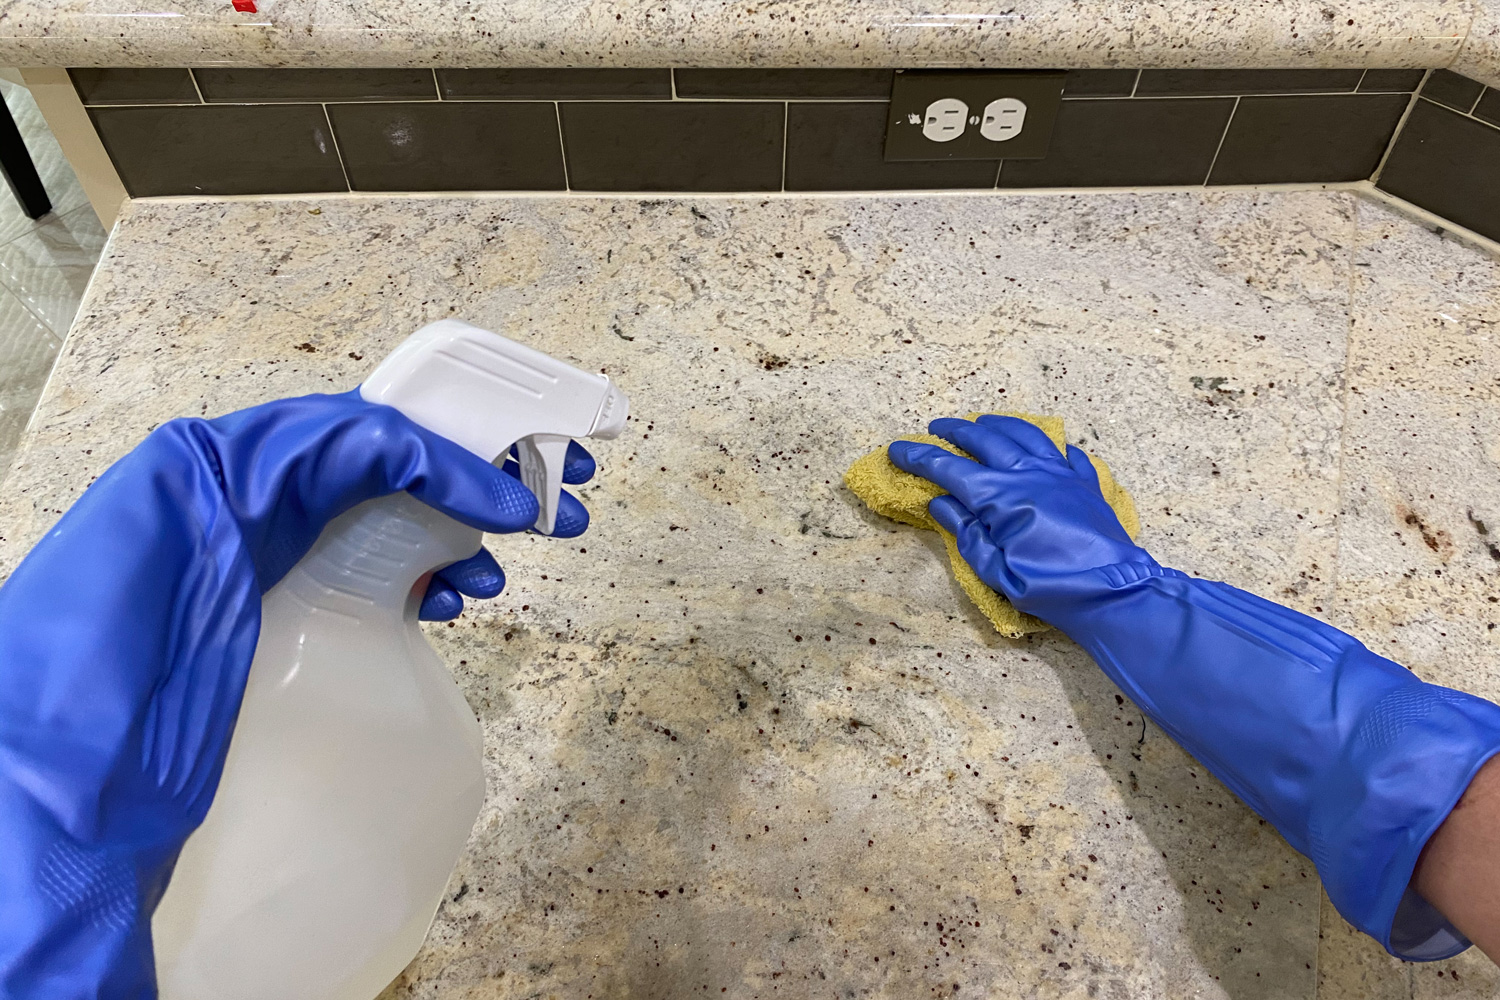 Using anti bacterial cleaning spray to sterilize counter tops to prevent infection